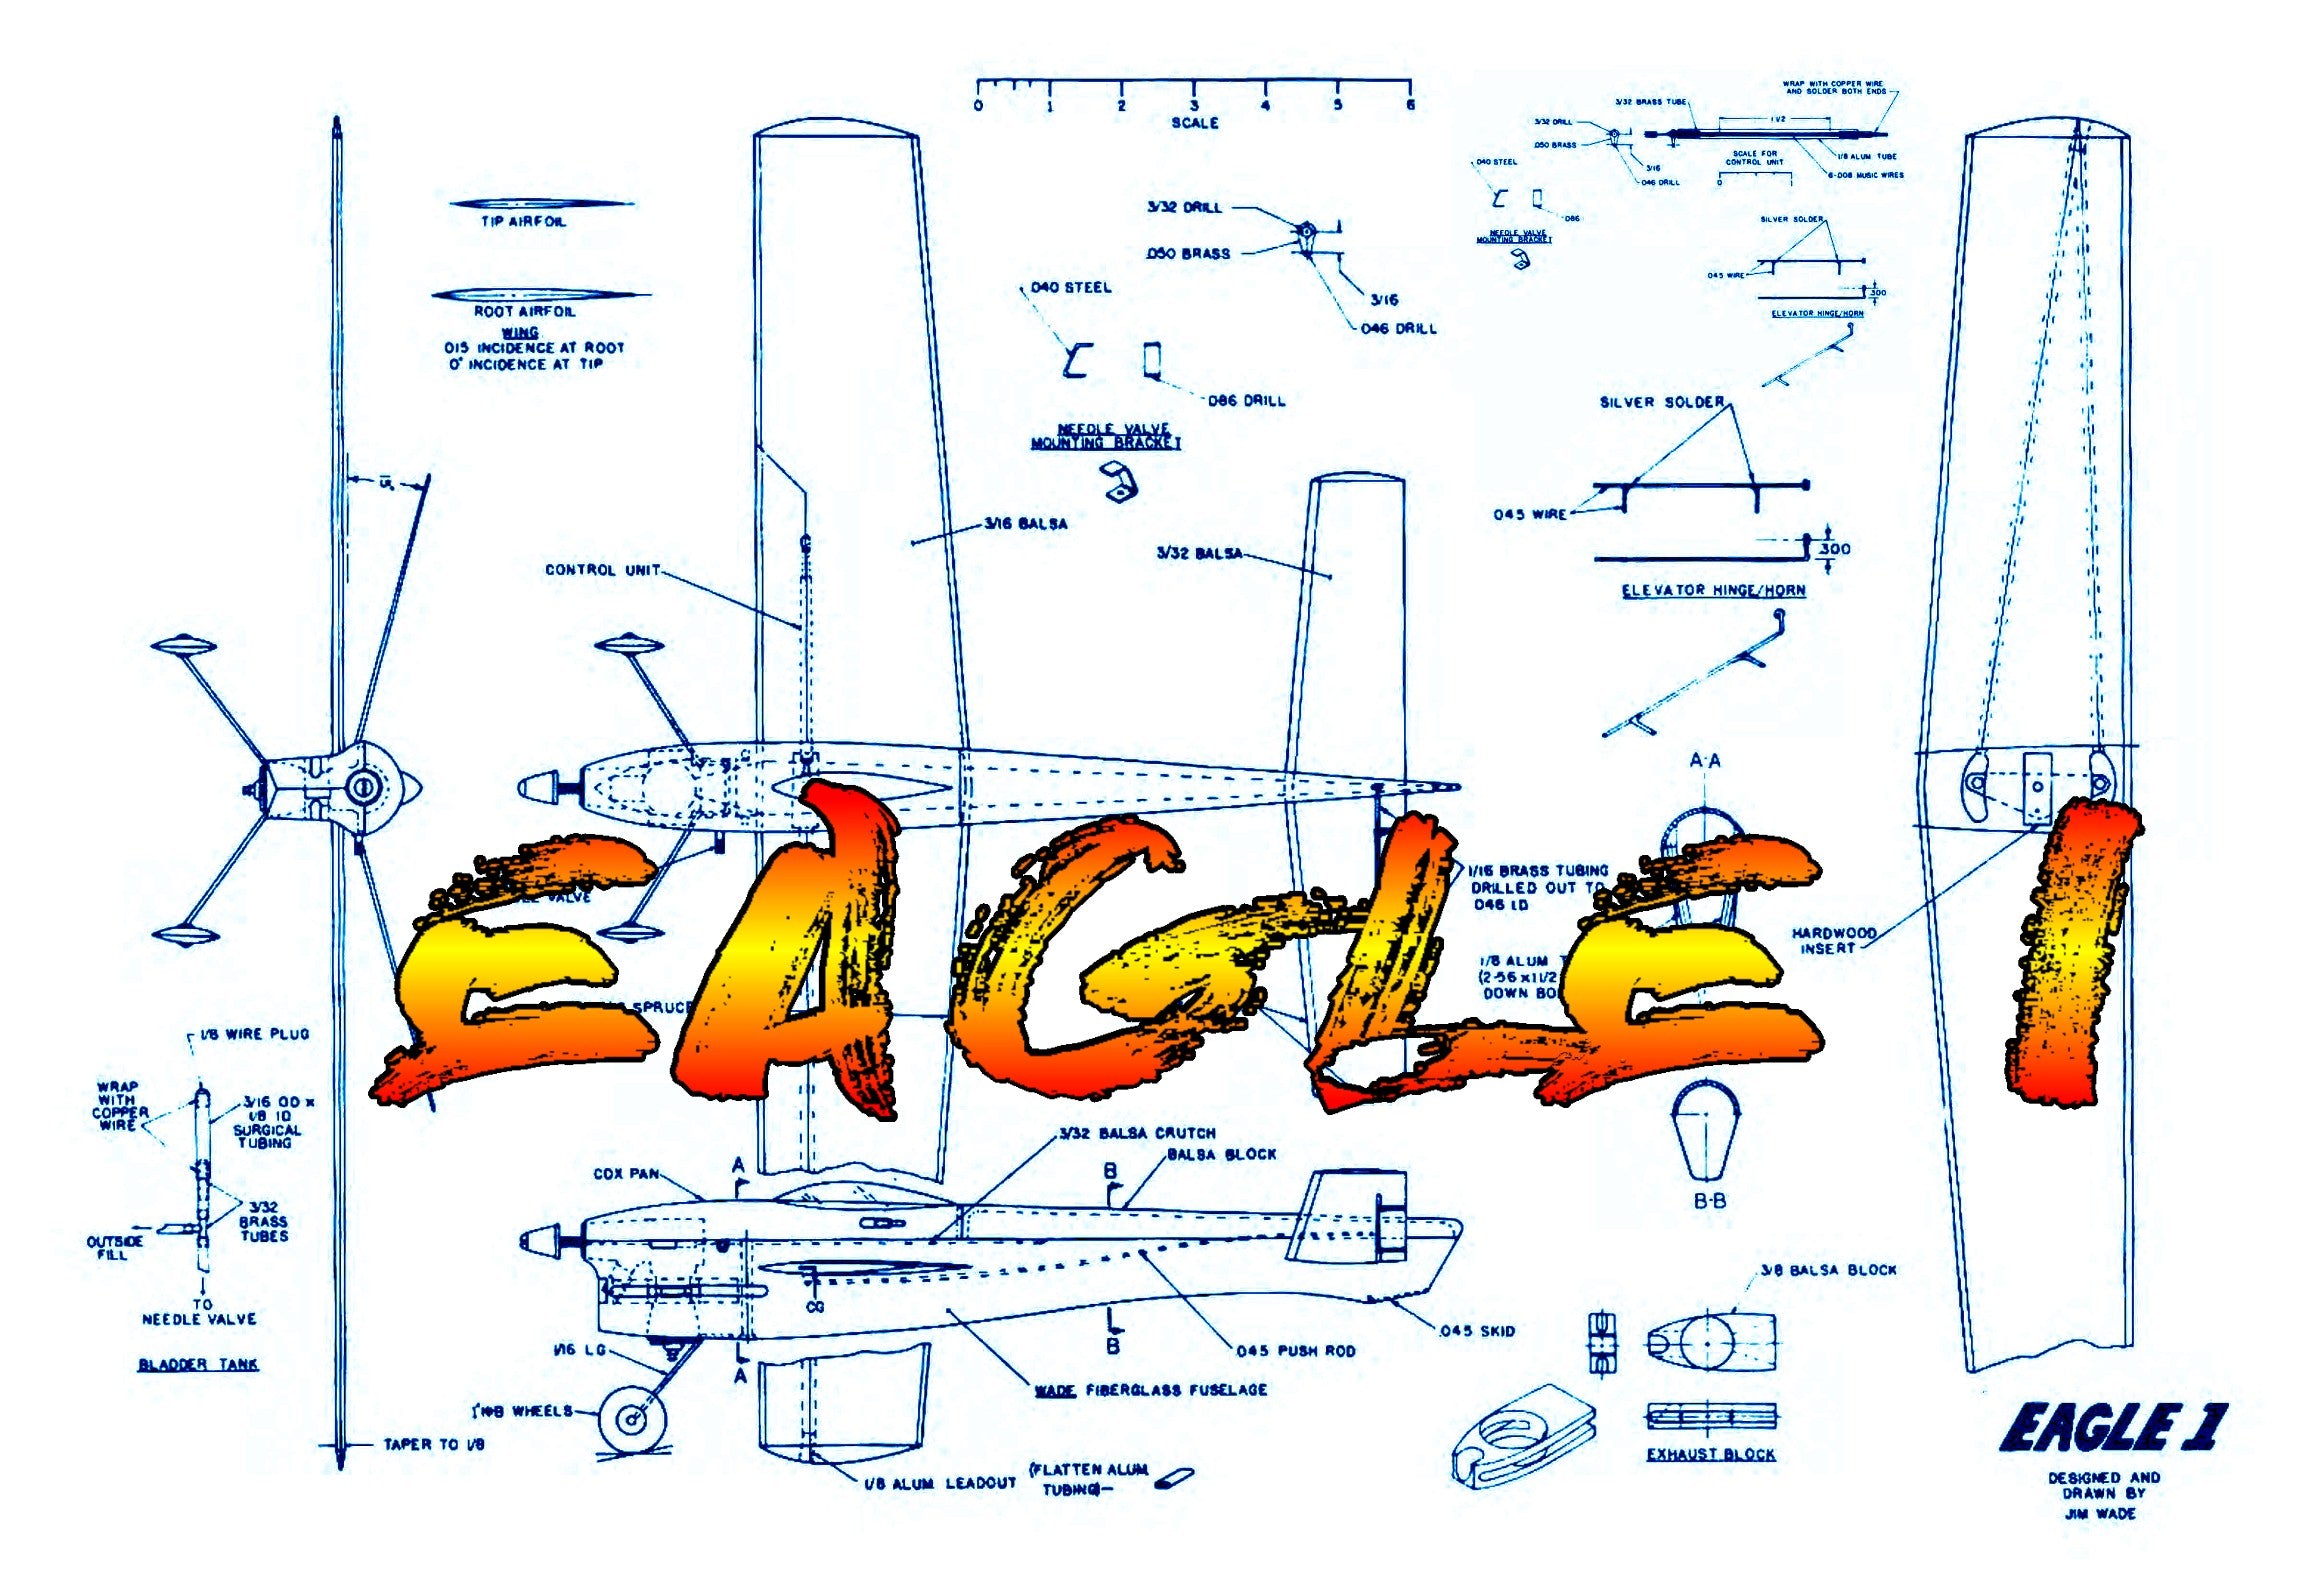 full size printed plan 1974 1/2 a control line speed eagle i wingspan 18 3/4"  engine 1/2a